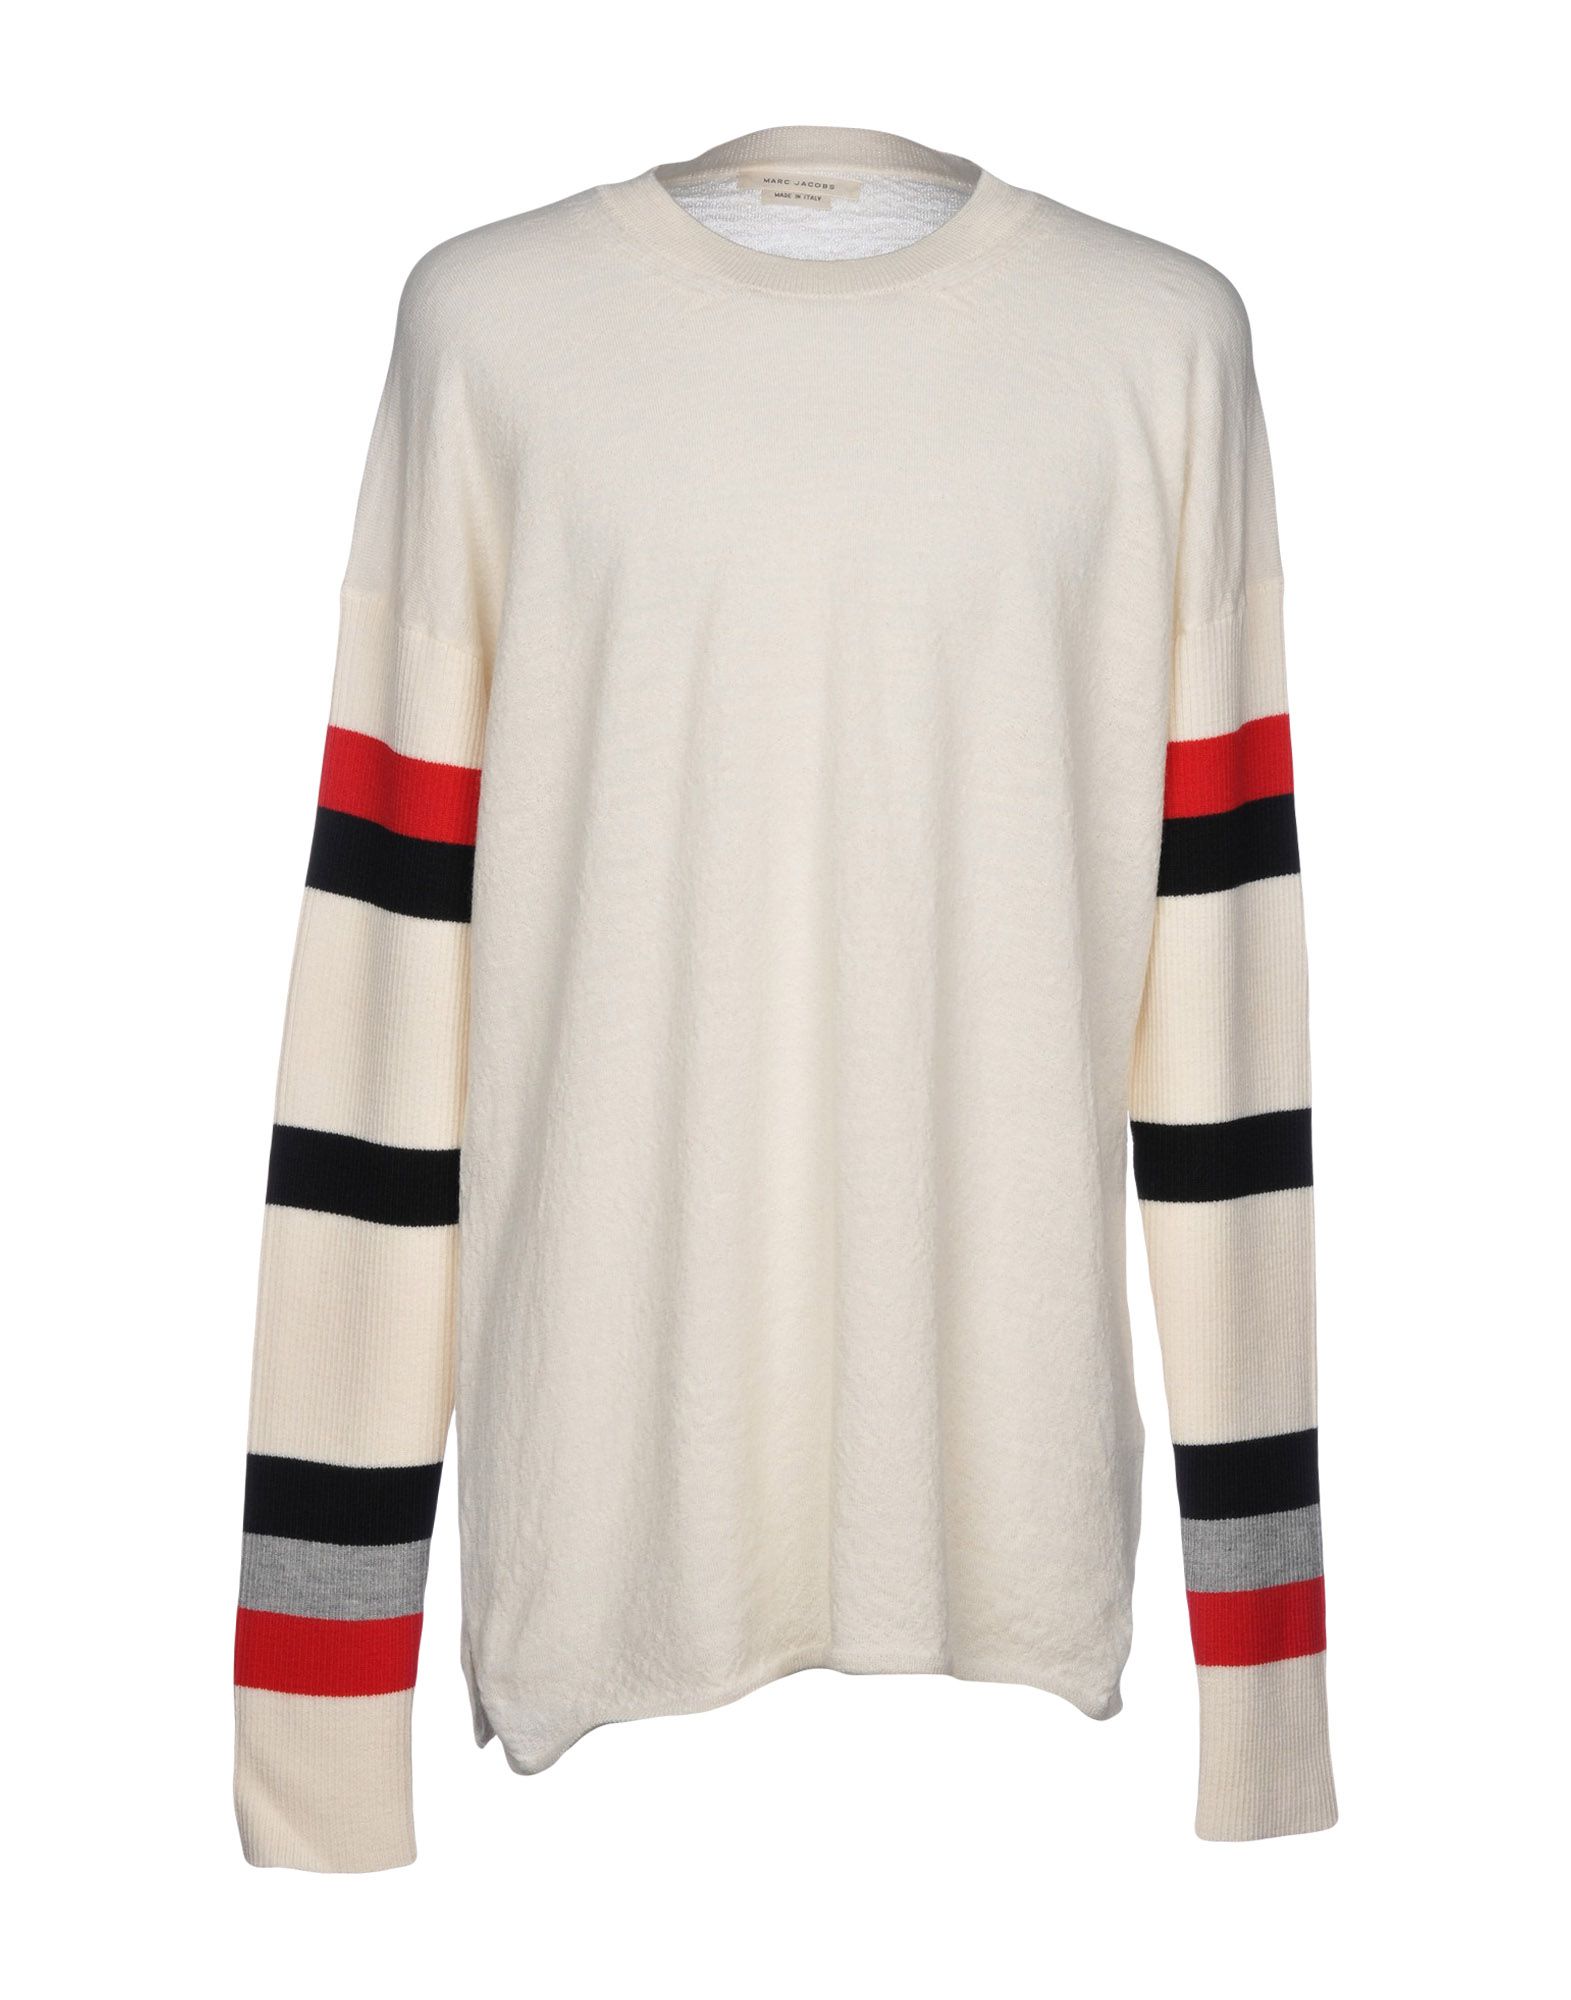 MARC JACOBS Sweater,39860501RN 6